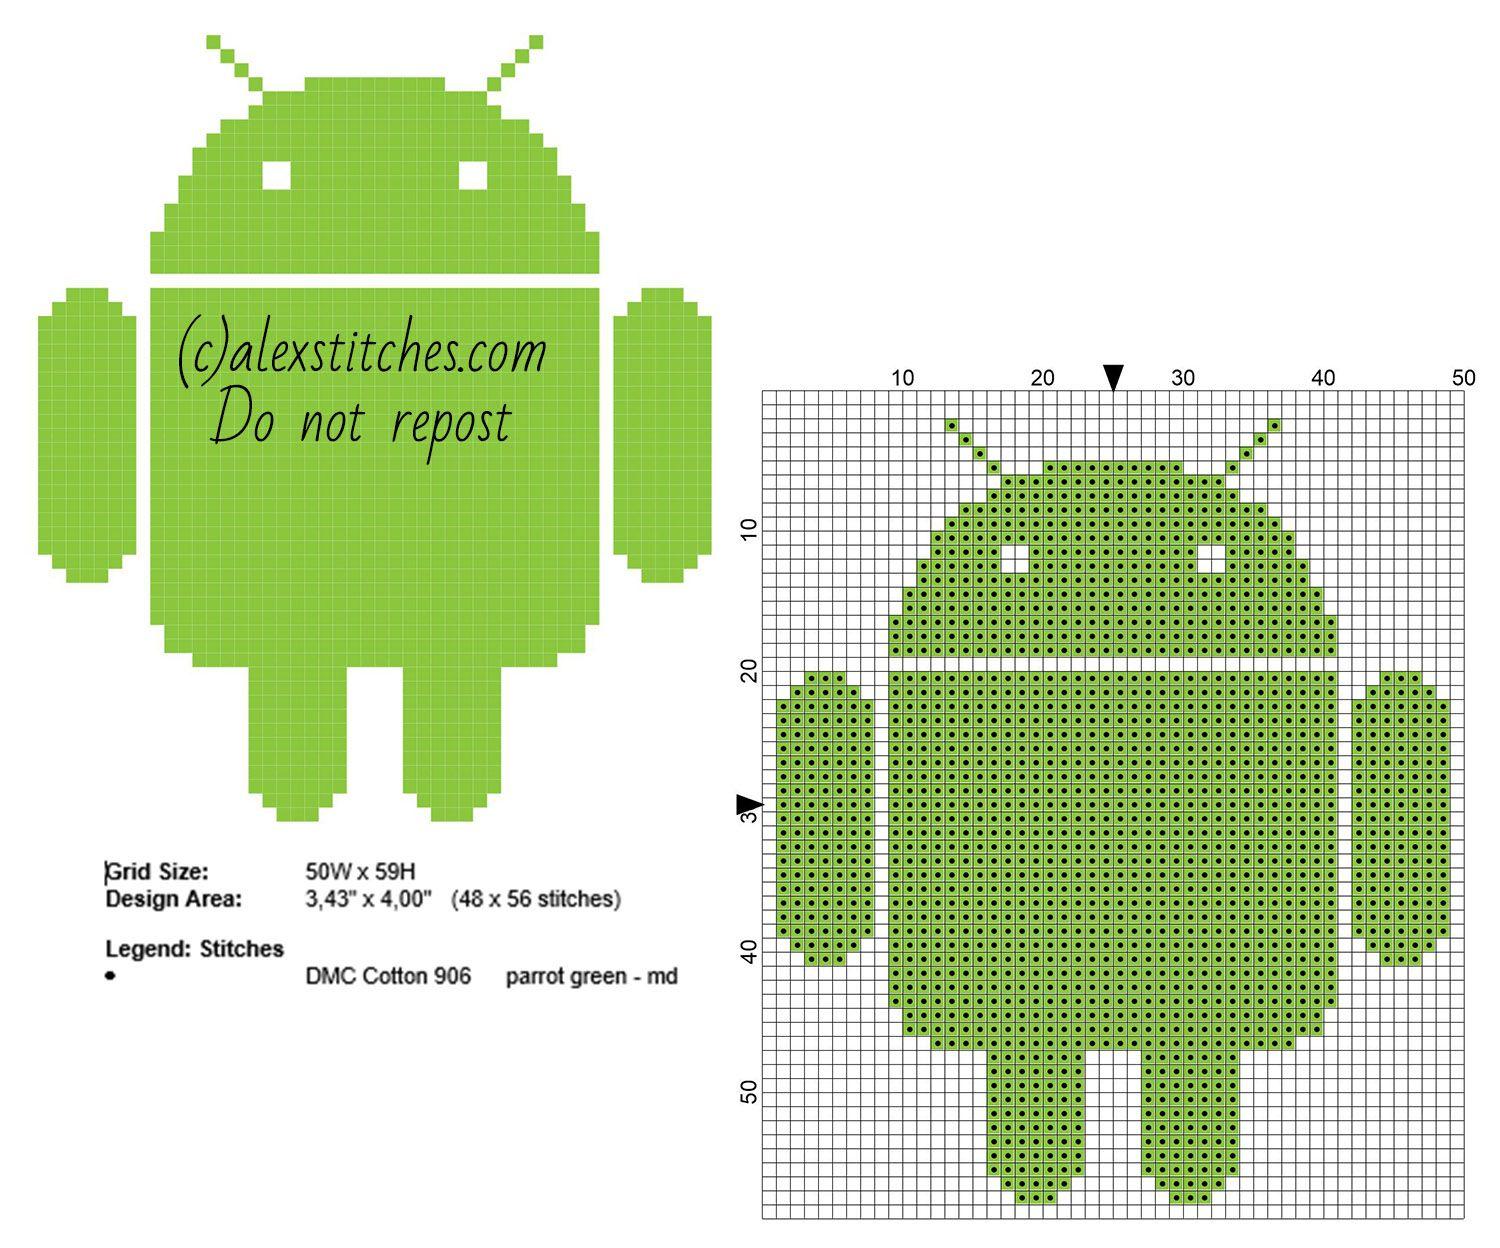 Small Android Logo - Android logo free small cross stitch pattern 48 x 56 stitches only ...